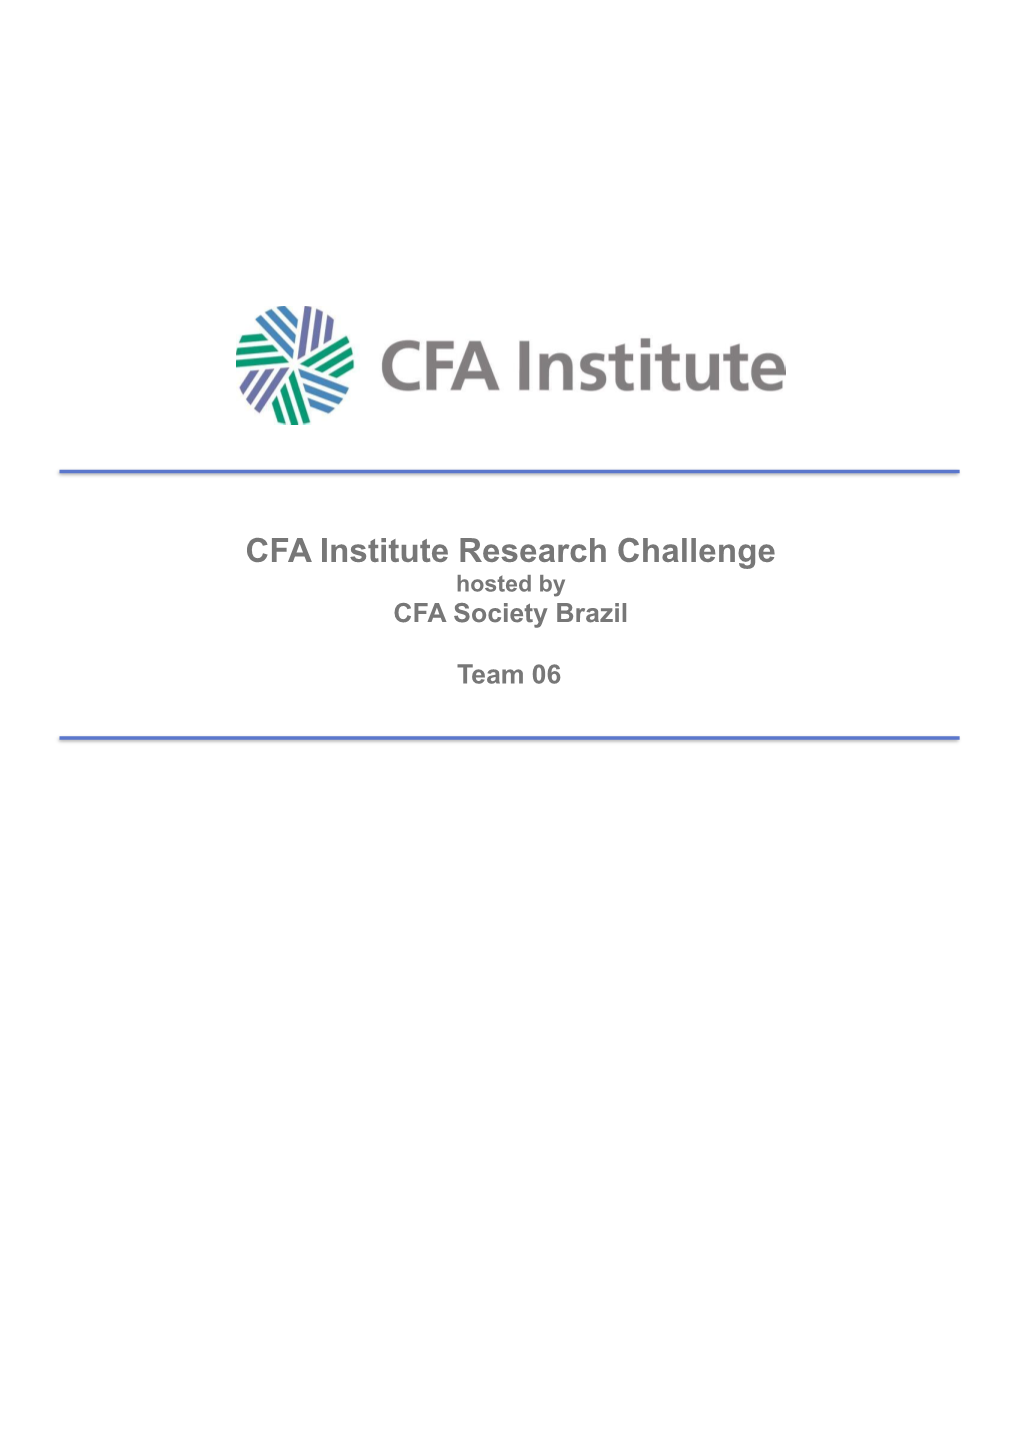 CFA Institute Research Challenge Hosted by CFA Society Brazil